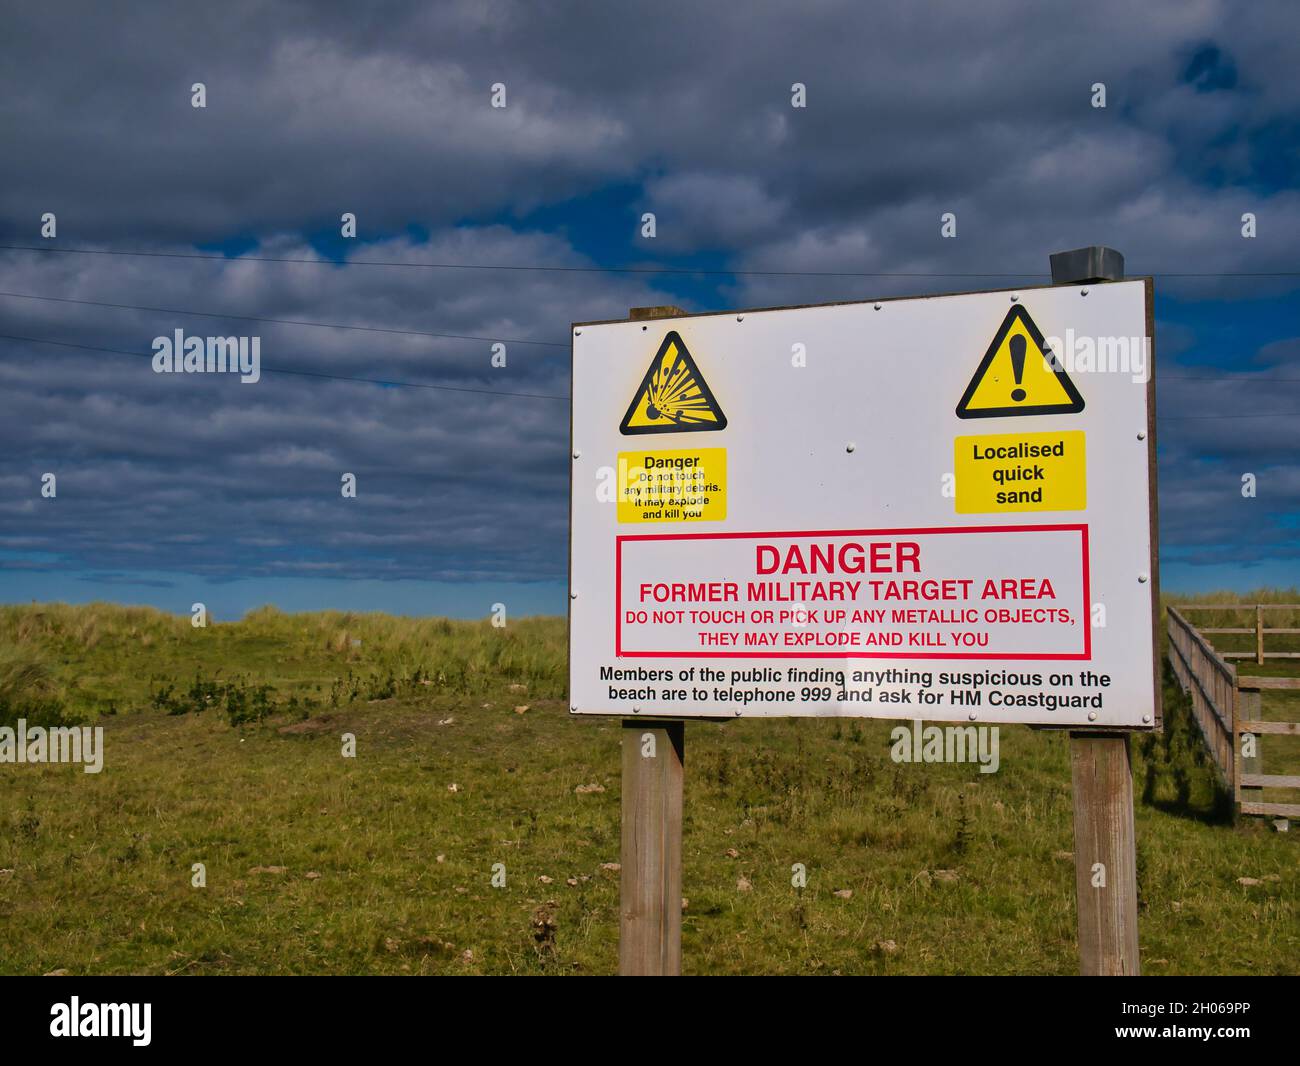 A large sign next to a former military target area warns not to pick up any metallic objects or military debris, which may prove fatal. The sign also Stock Photo